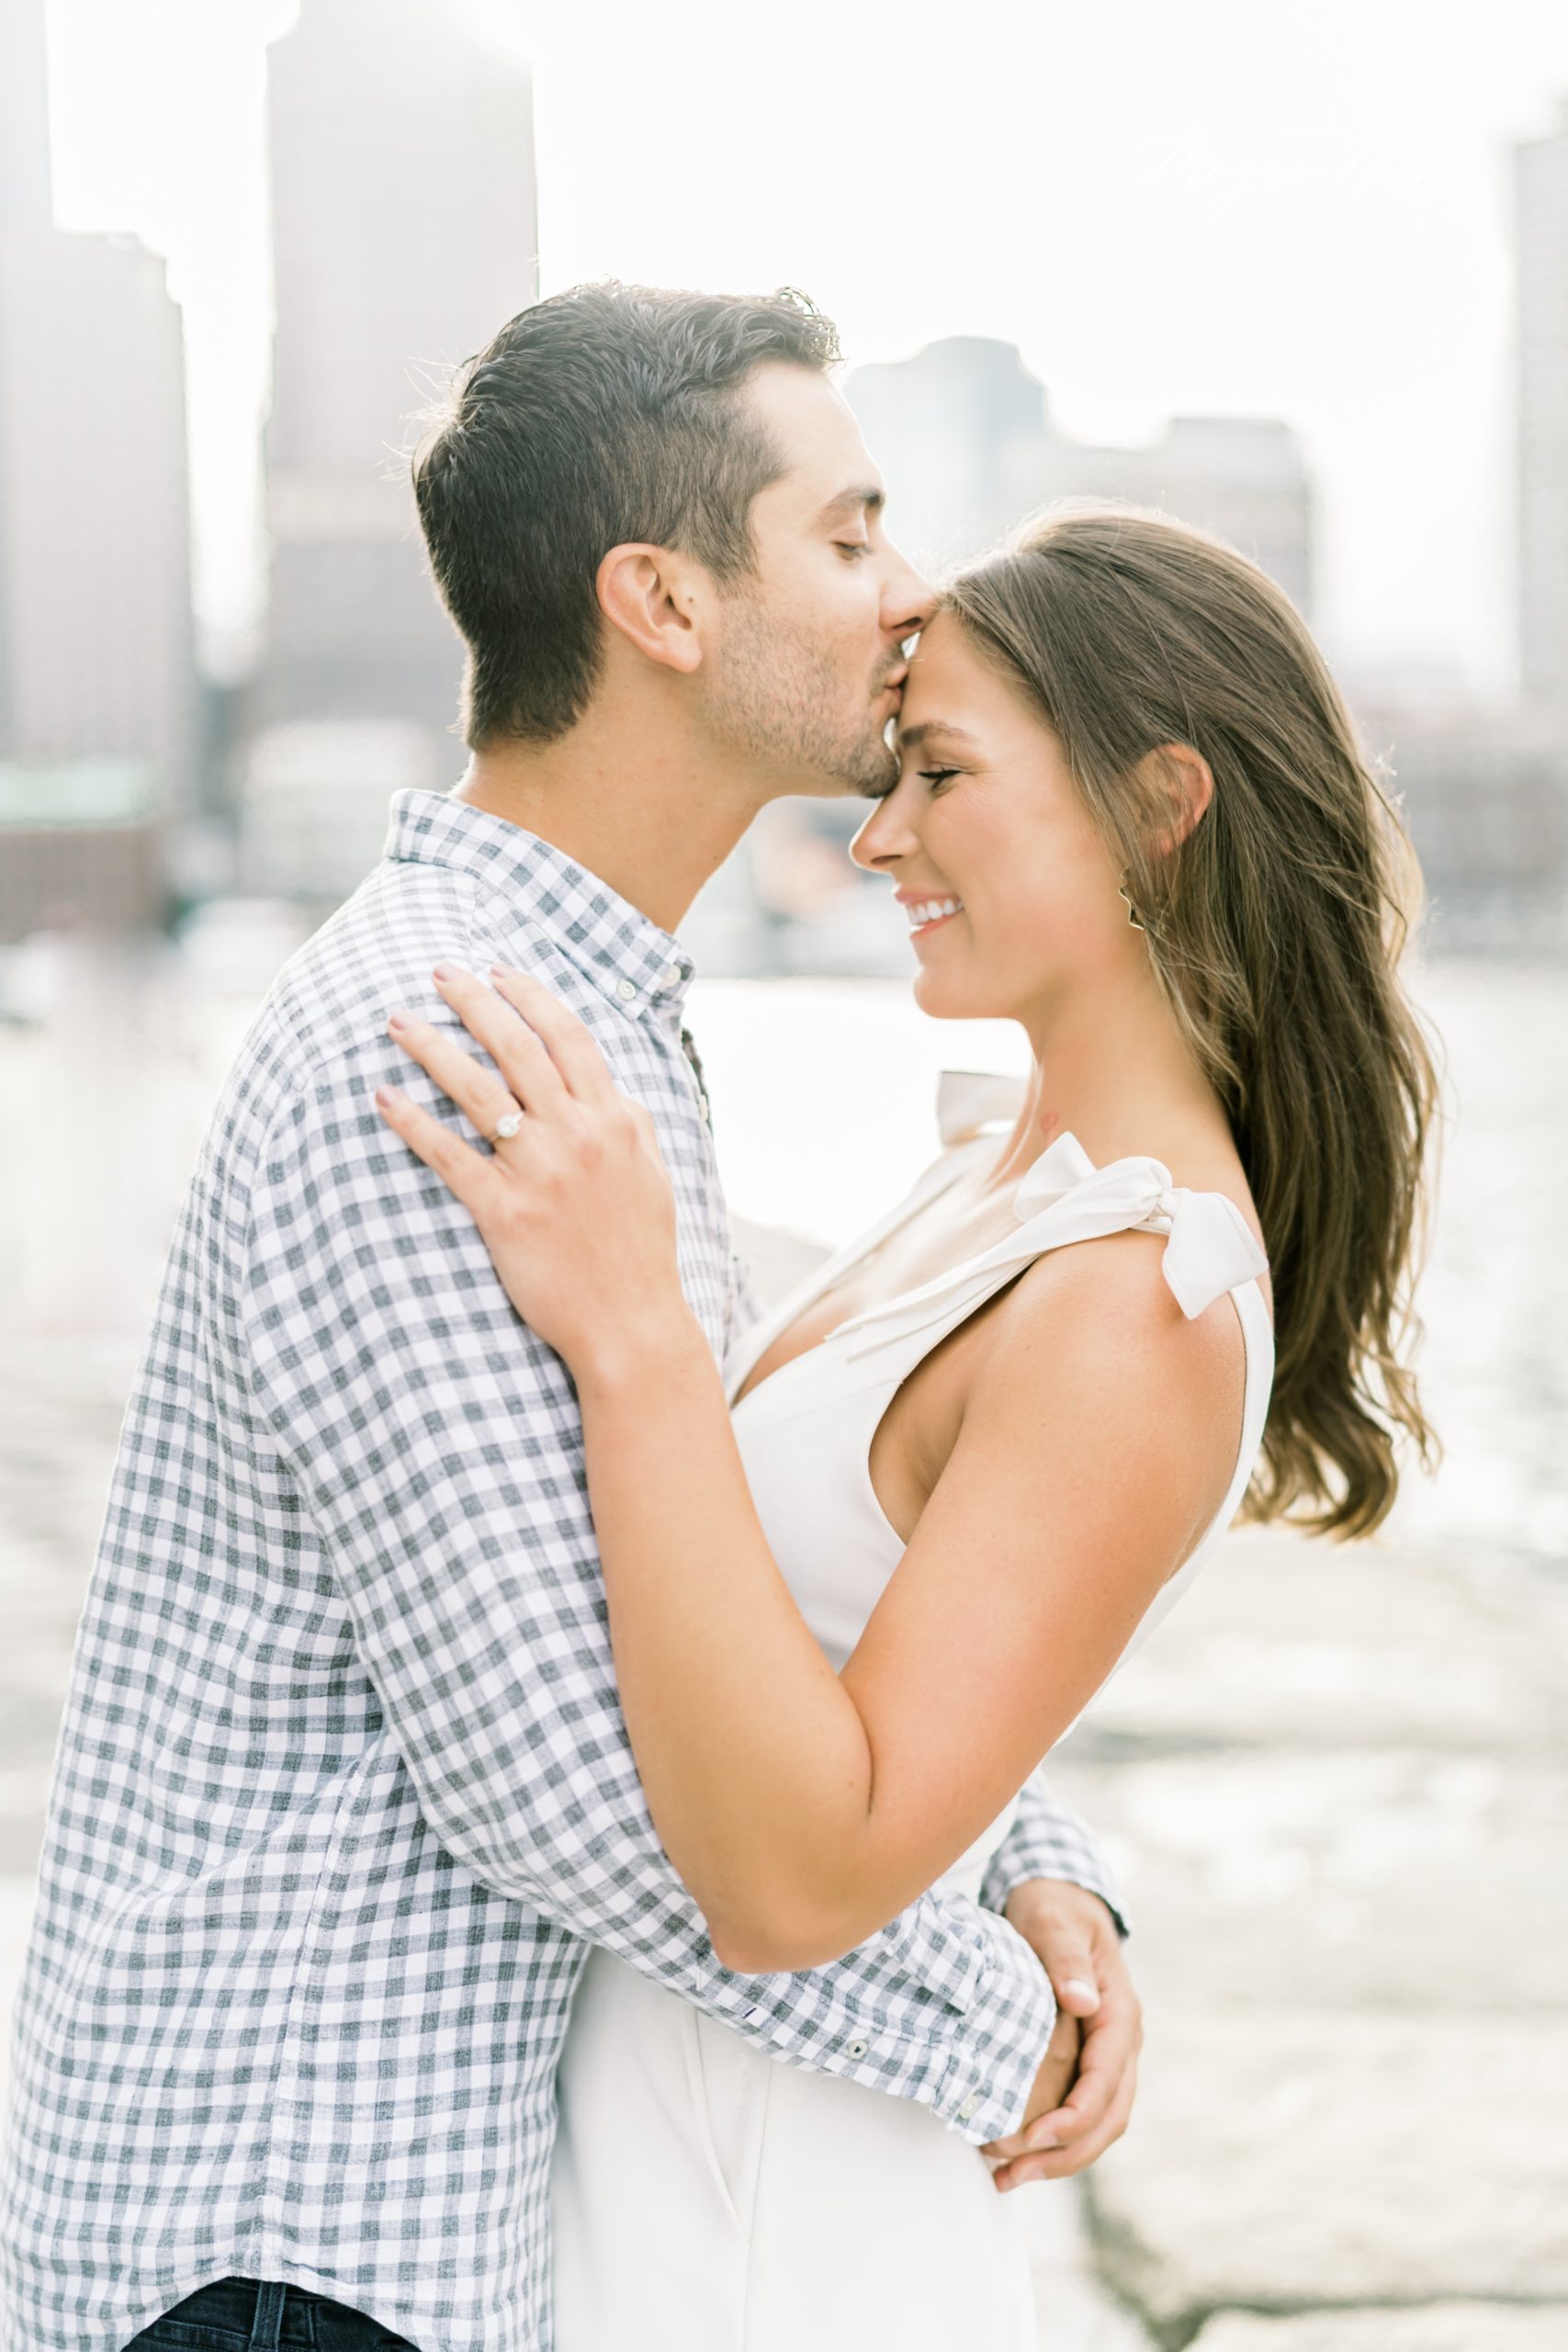 Forehead kiss in boston harbor engagement session